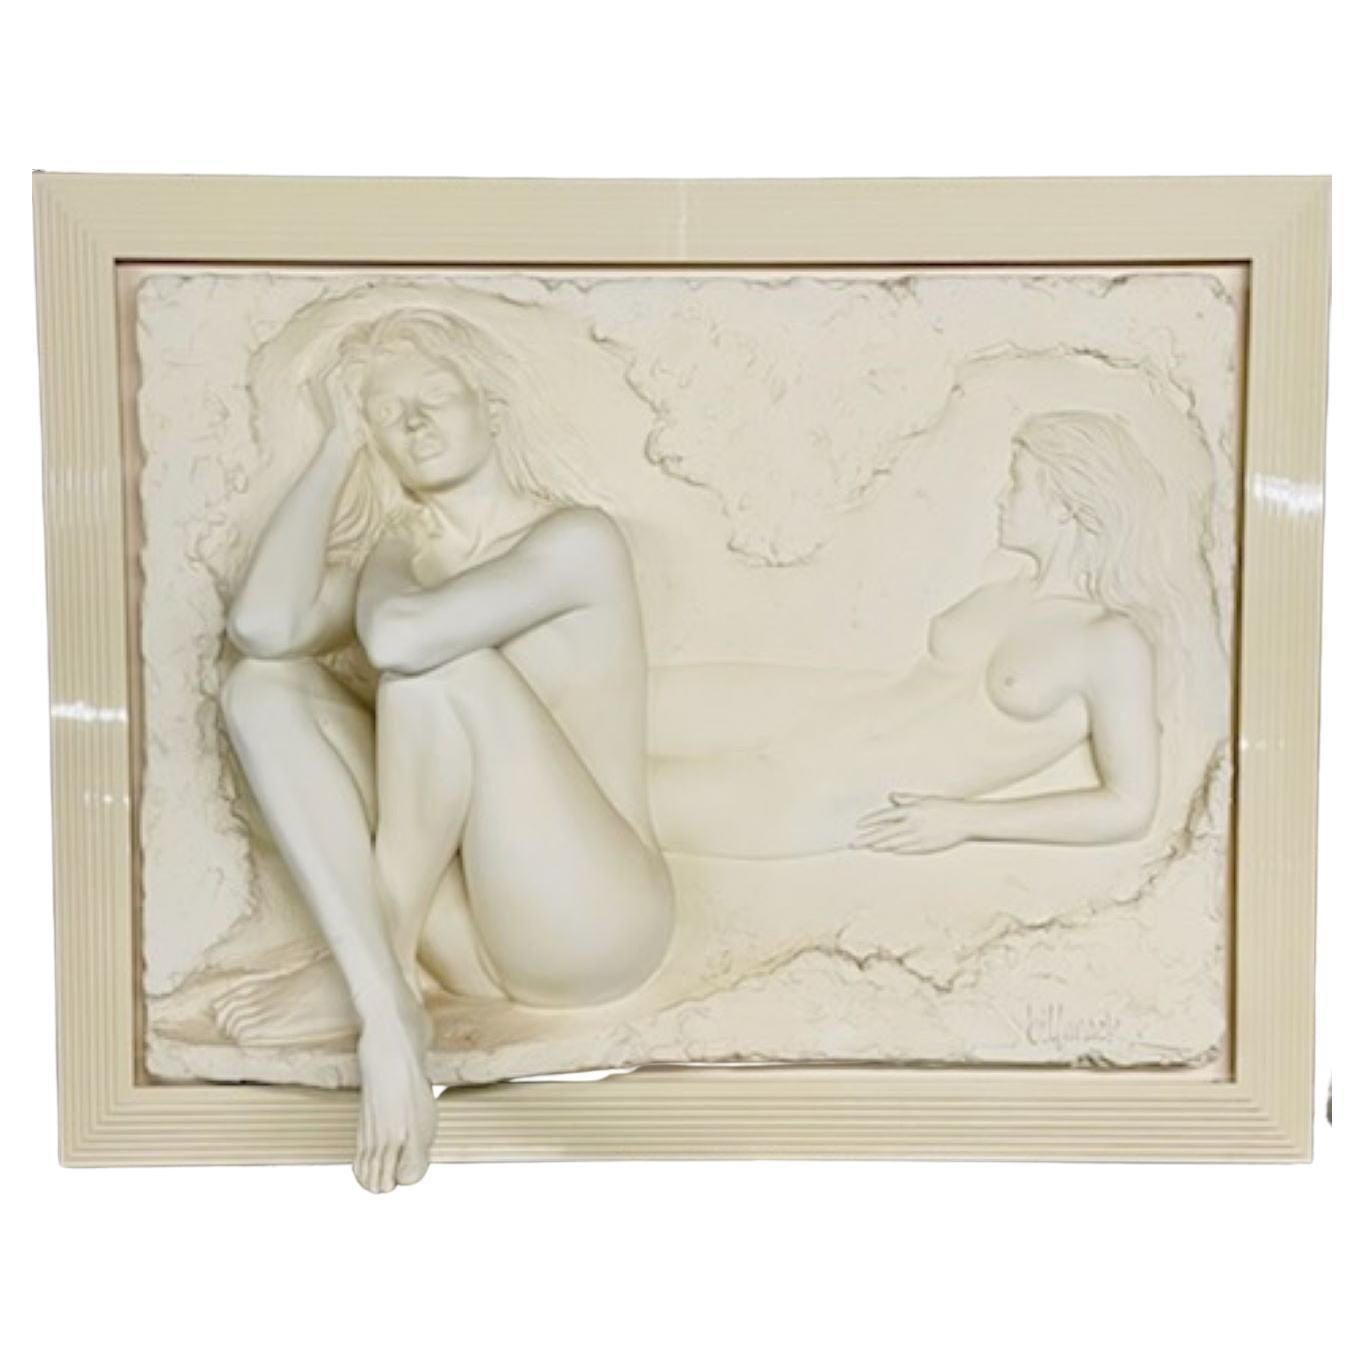 Bill Mack 3D Figural Wall Sculpture, "Reflection", Monumental in Size, Nude For Sale